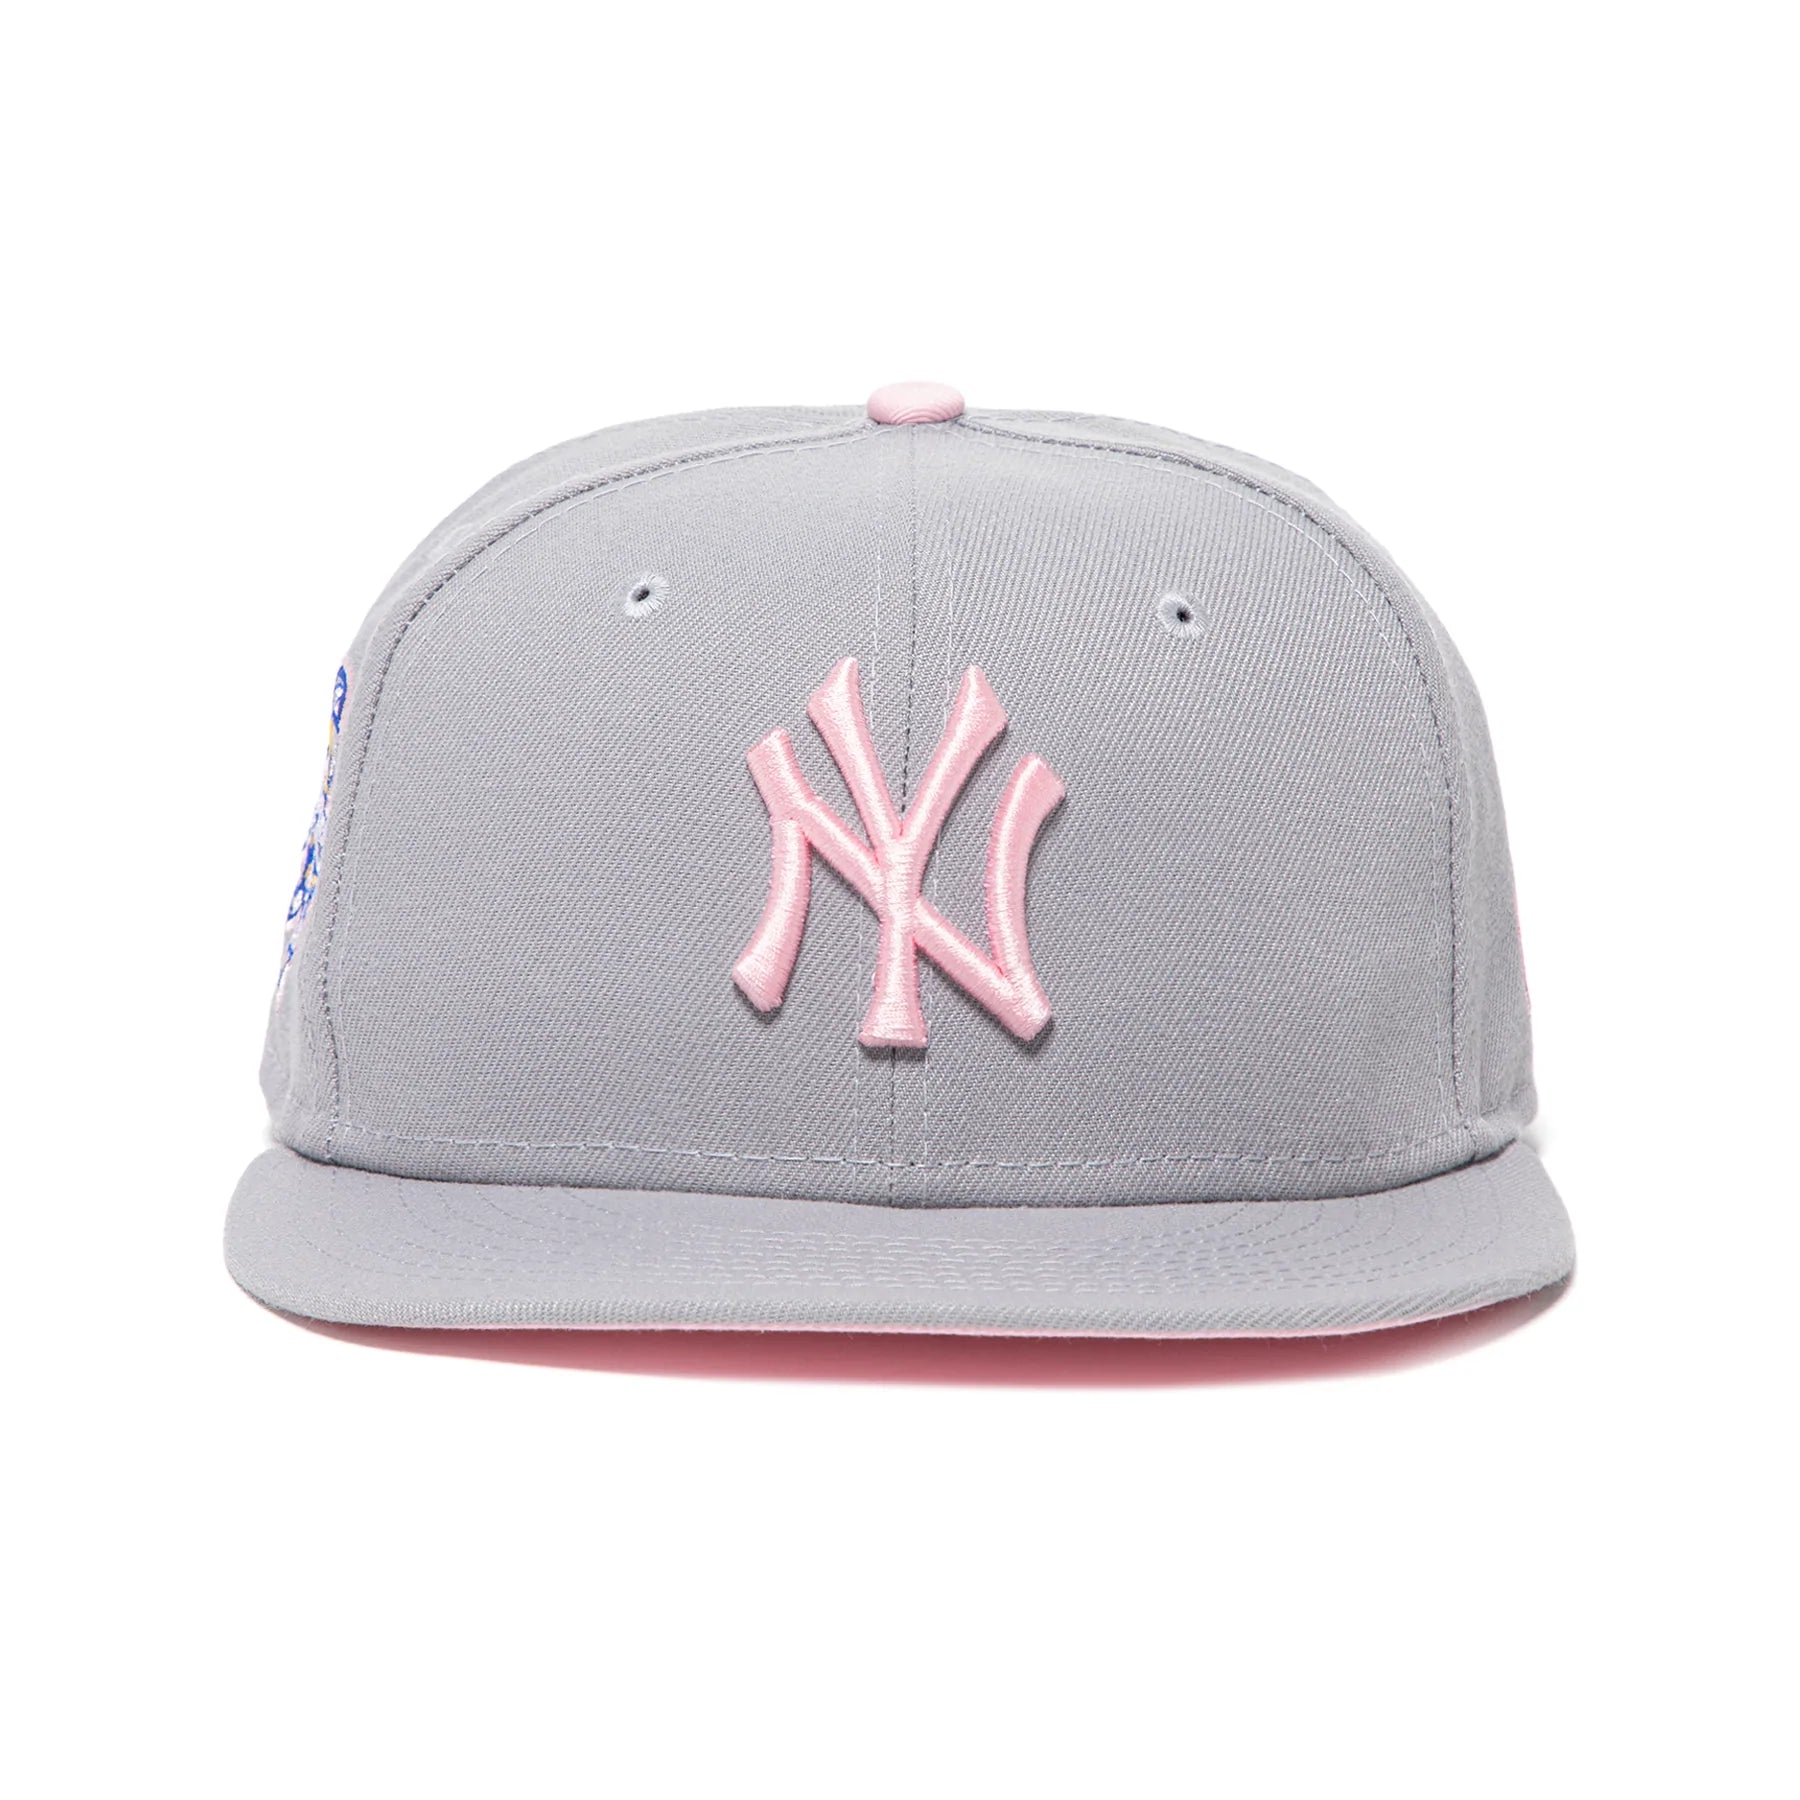 Gray / Pink - New Era x Concepts 5950 New York Yankees Fitted Hat - Gottliebpaludan Sneakers Sale Online - $100.00